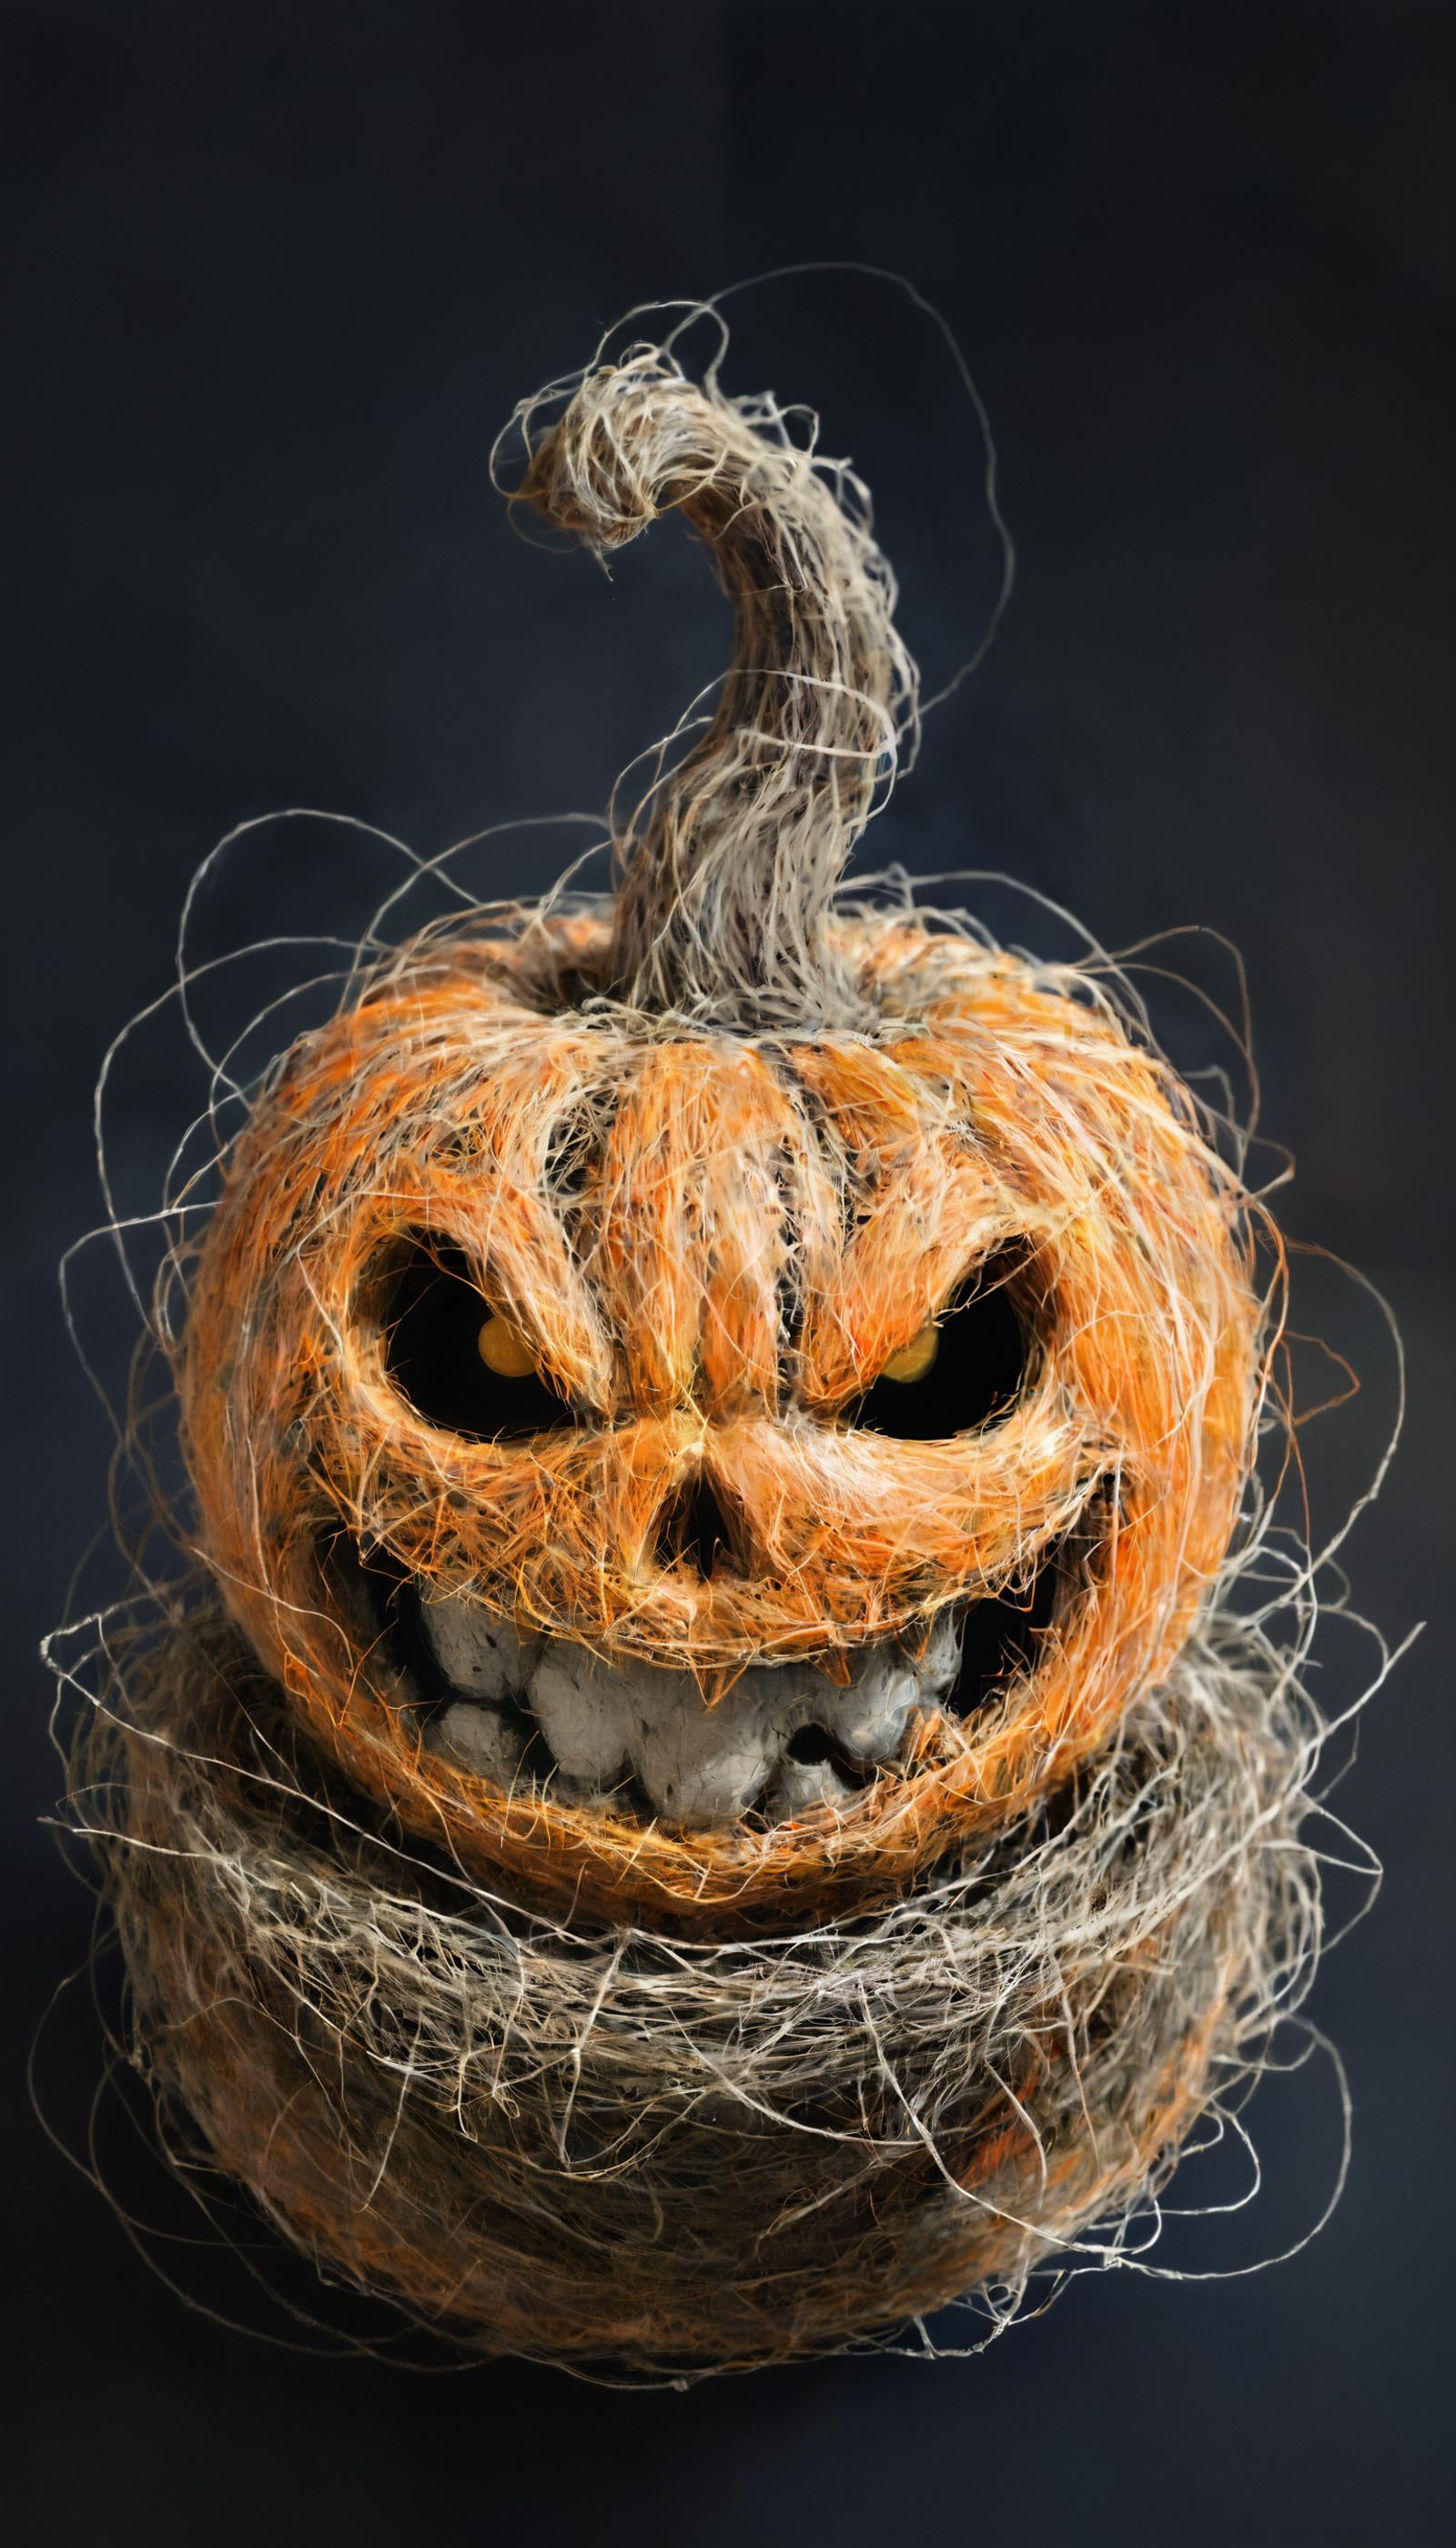 A scary pumpkin with yellow eyes and a fuzzy mouth.